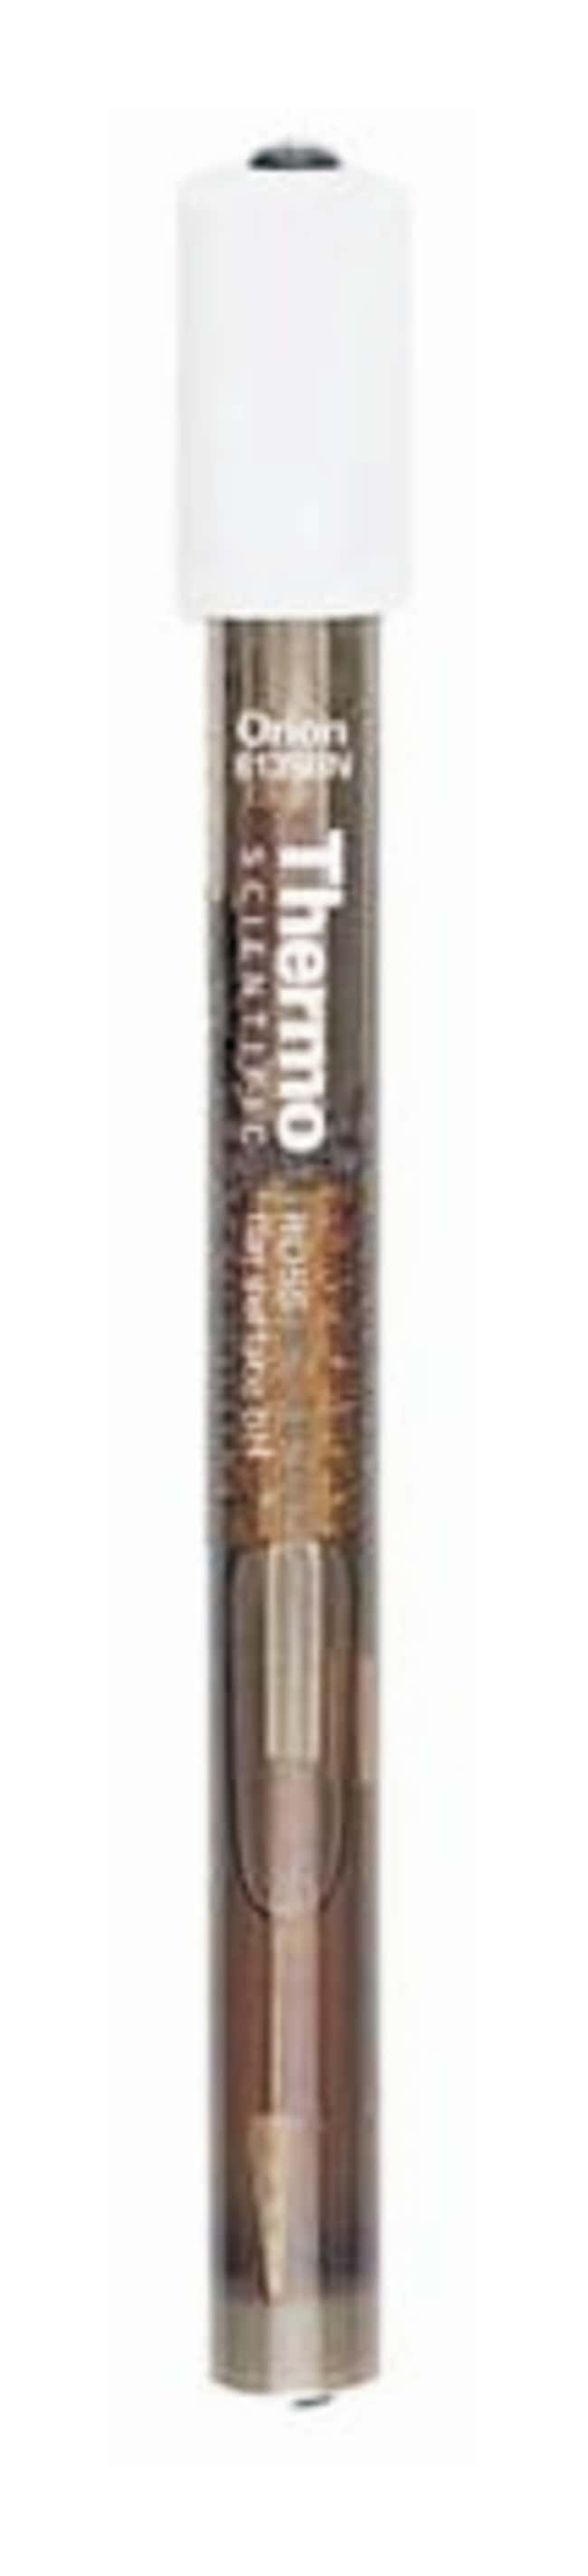 Orion™ 8135BN ROSS™ Combination Flat Surface pH Electrode